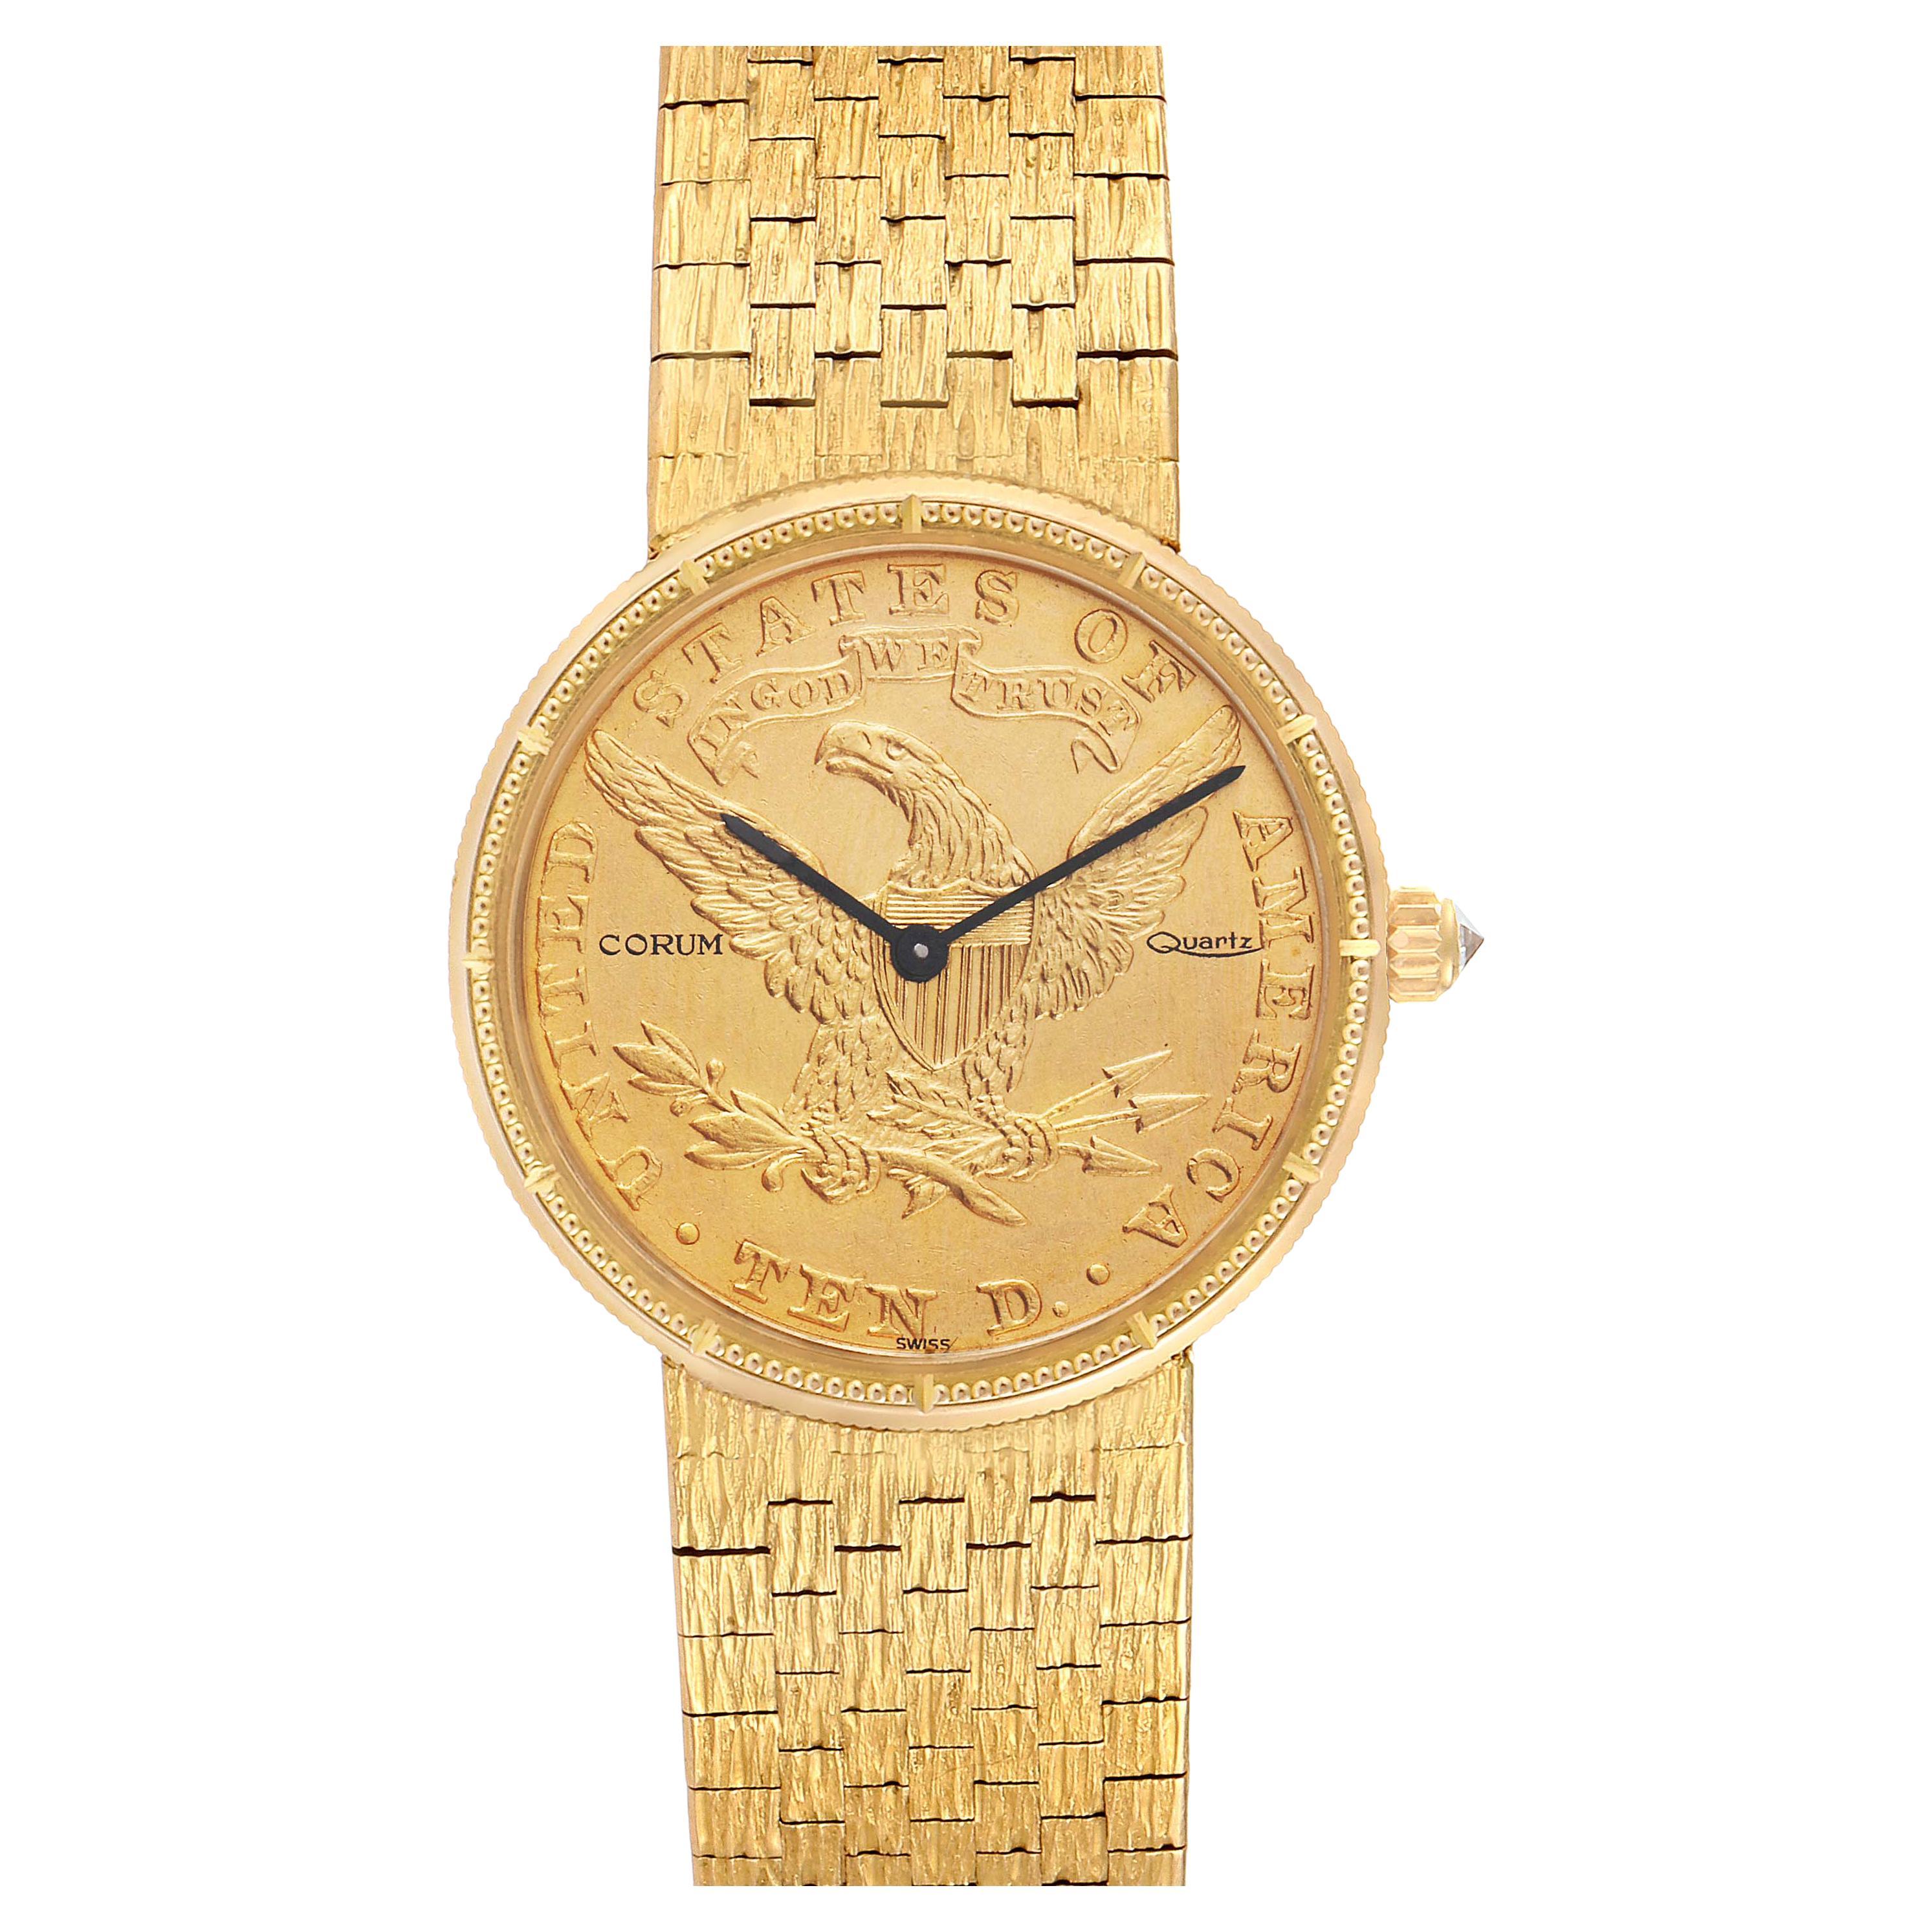 Corum Coin 10 Dollars Double Eagle Yellow Gold Ladies Watch 1901